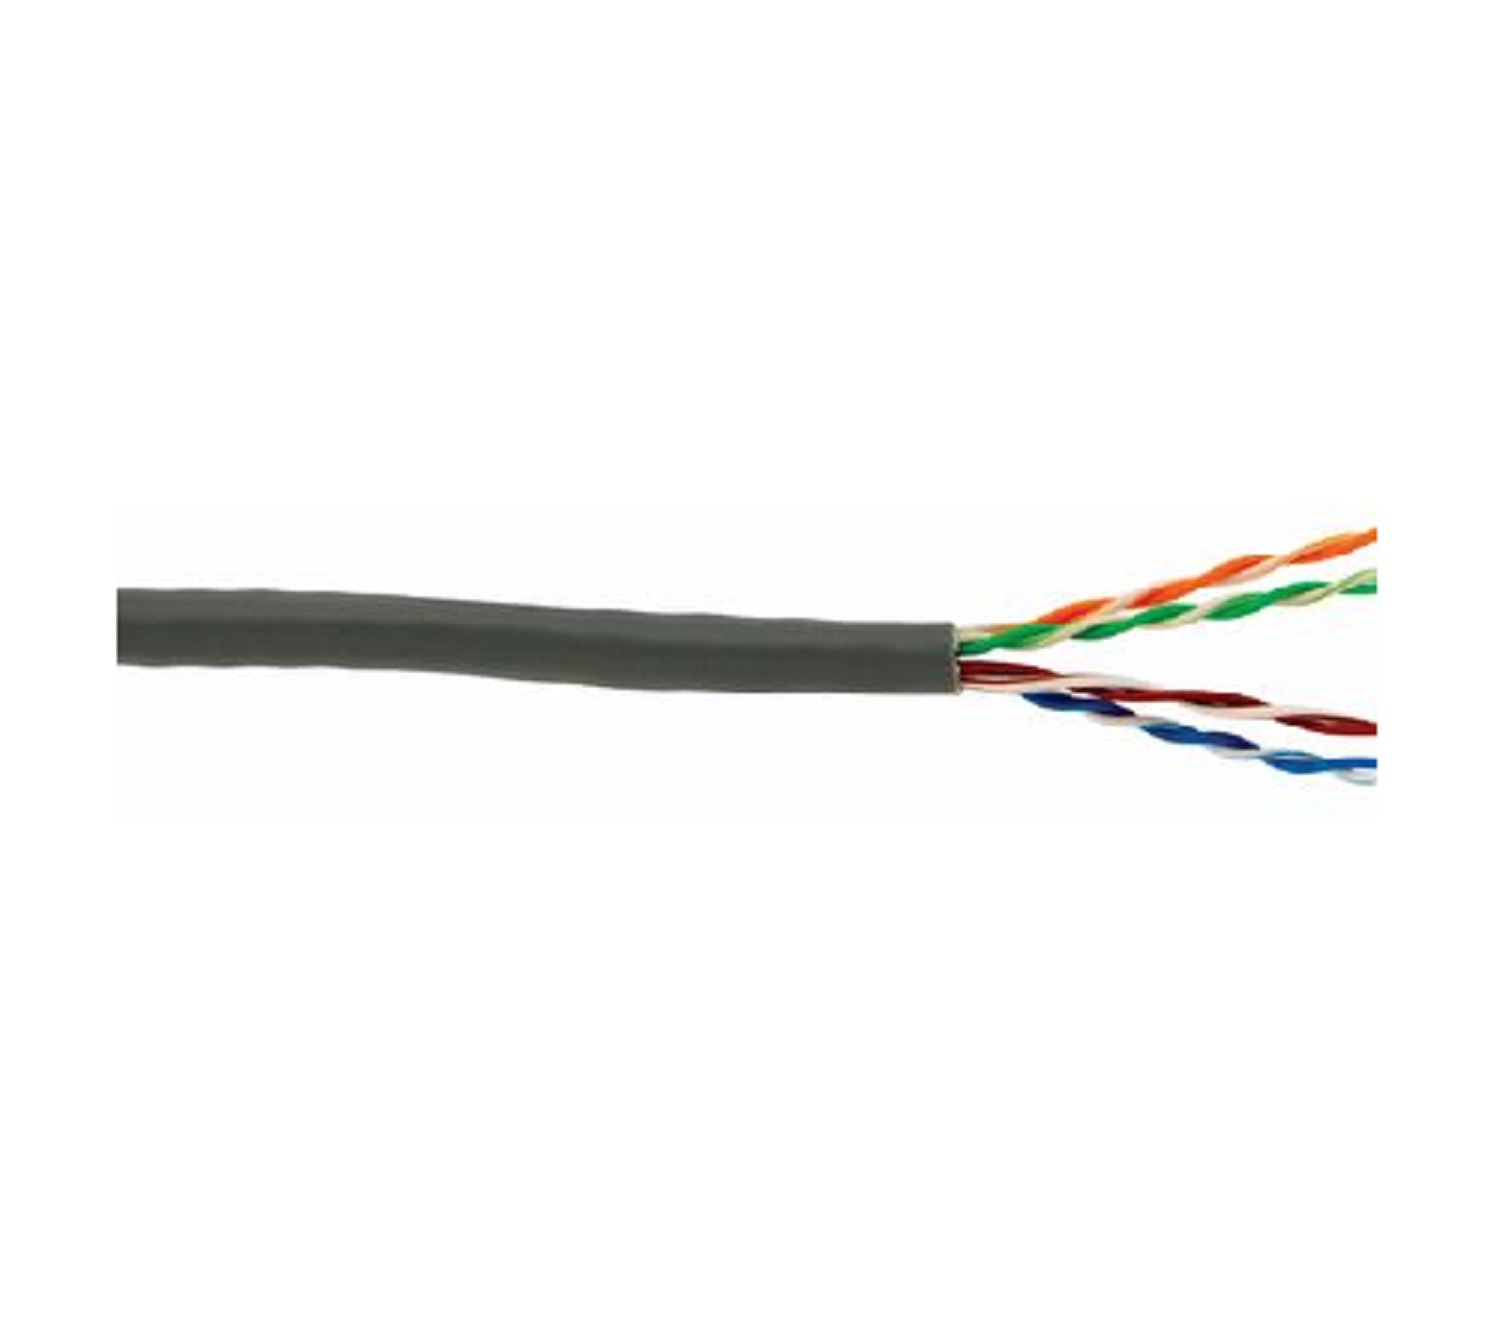 Cat6 UTP 23 AWG LSZH Solid Cable - 305M/Roll - Gray Color NCB-C6UGRYR-305-LS D-Link